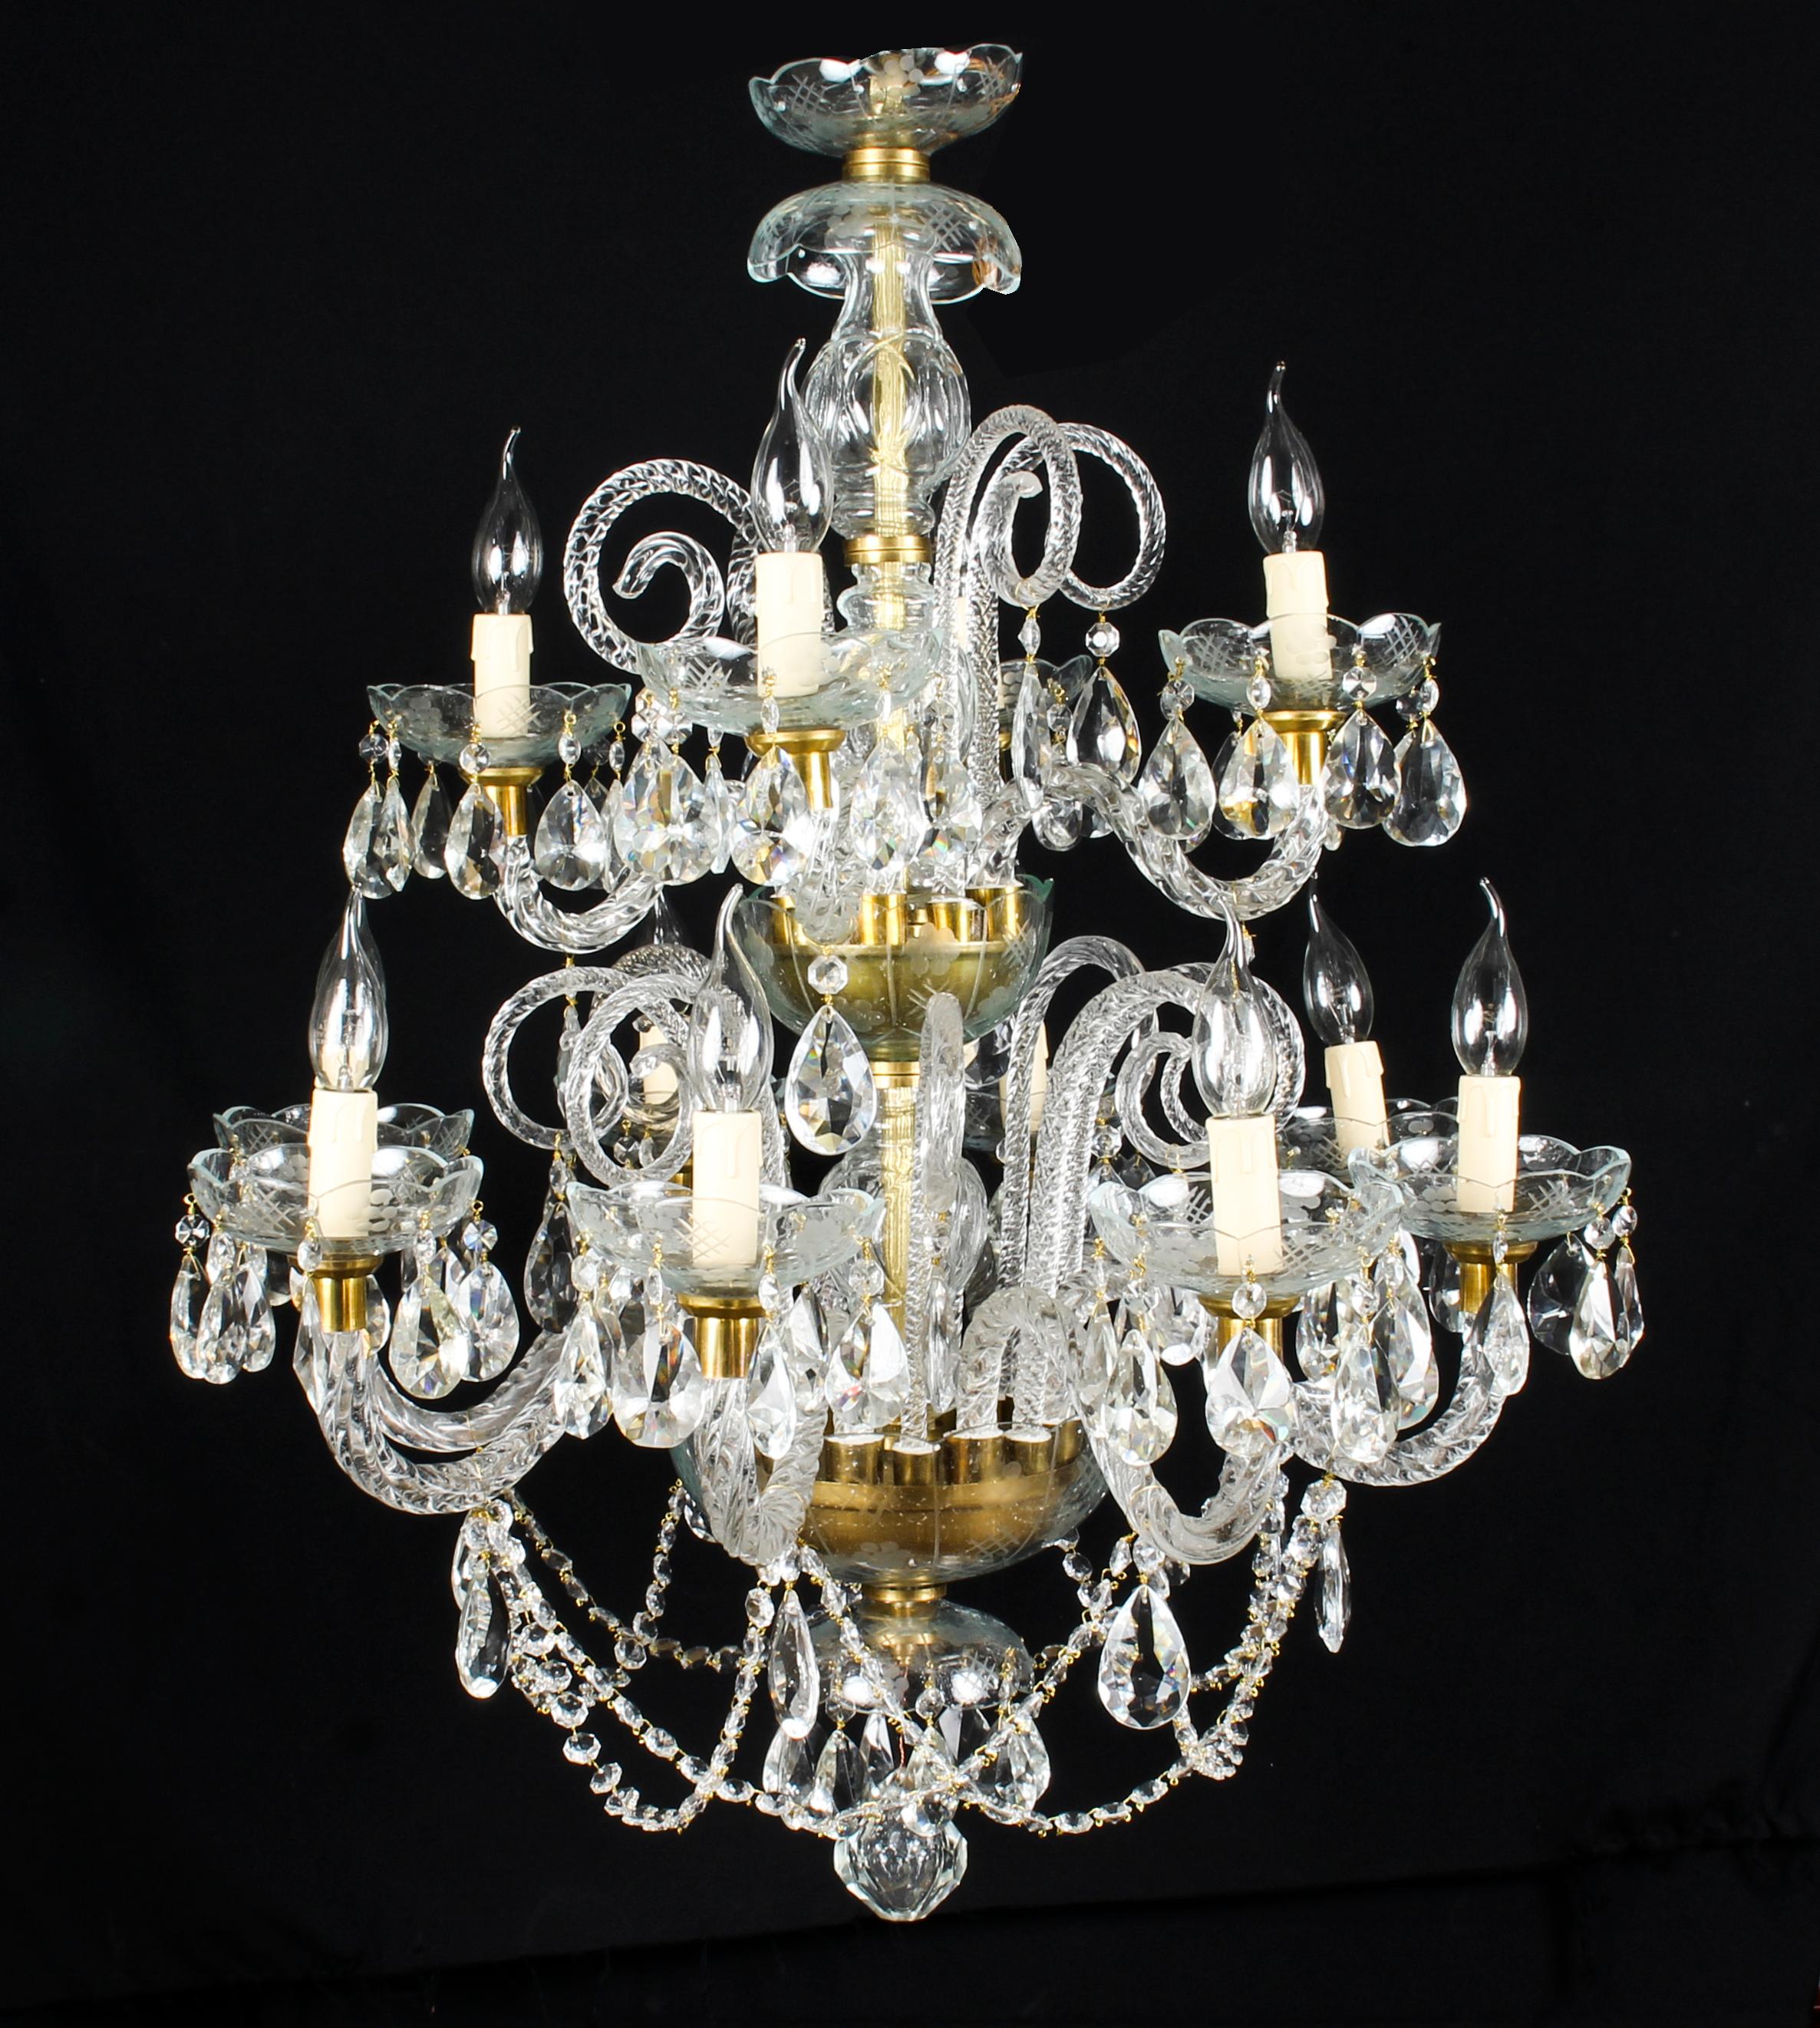 This is a beautiful pair of vintage Venetian two tier crystal chandeliers with twelve lights each and beautiful clear crystal drops, dating from the second half of the 20th century.

There are four lights on each top tier and eight on each lower